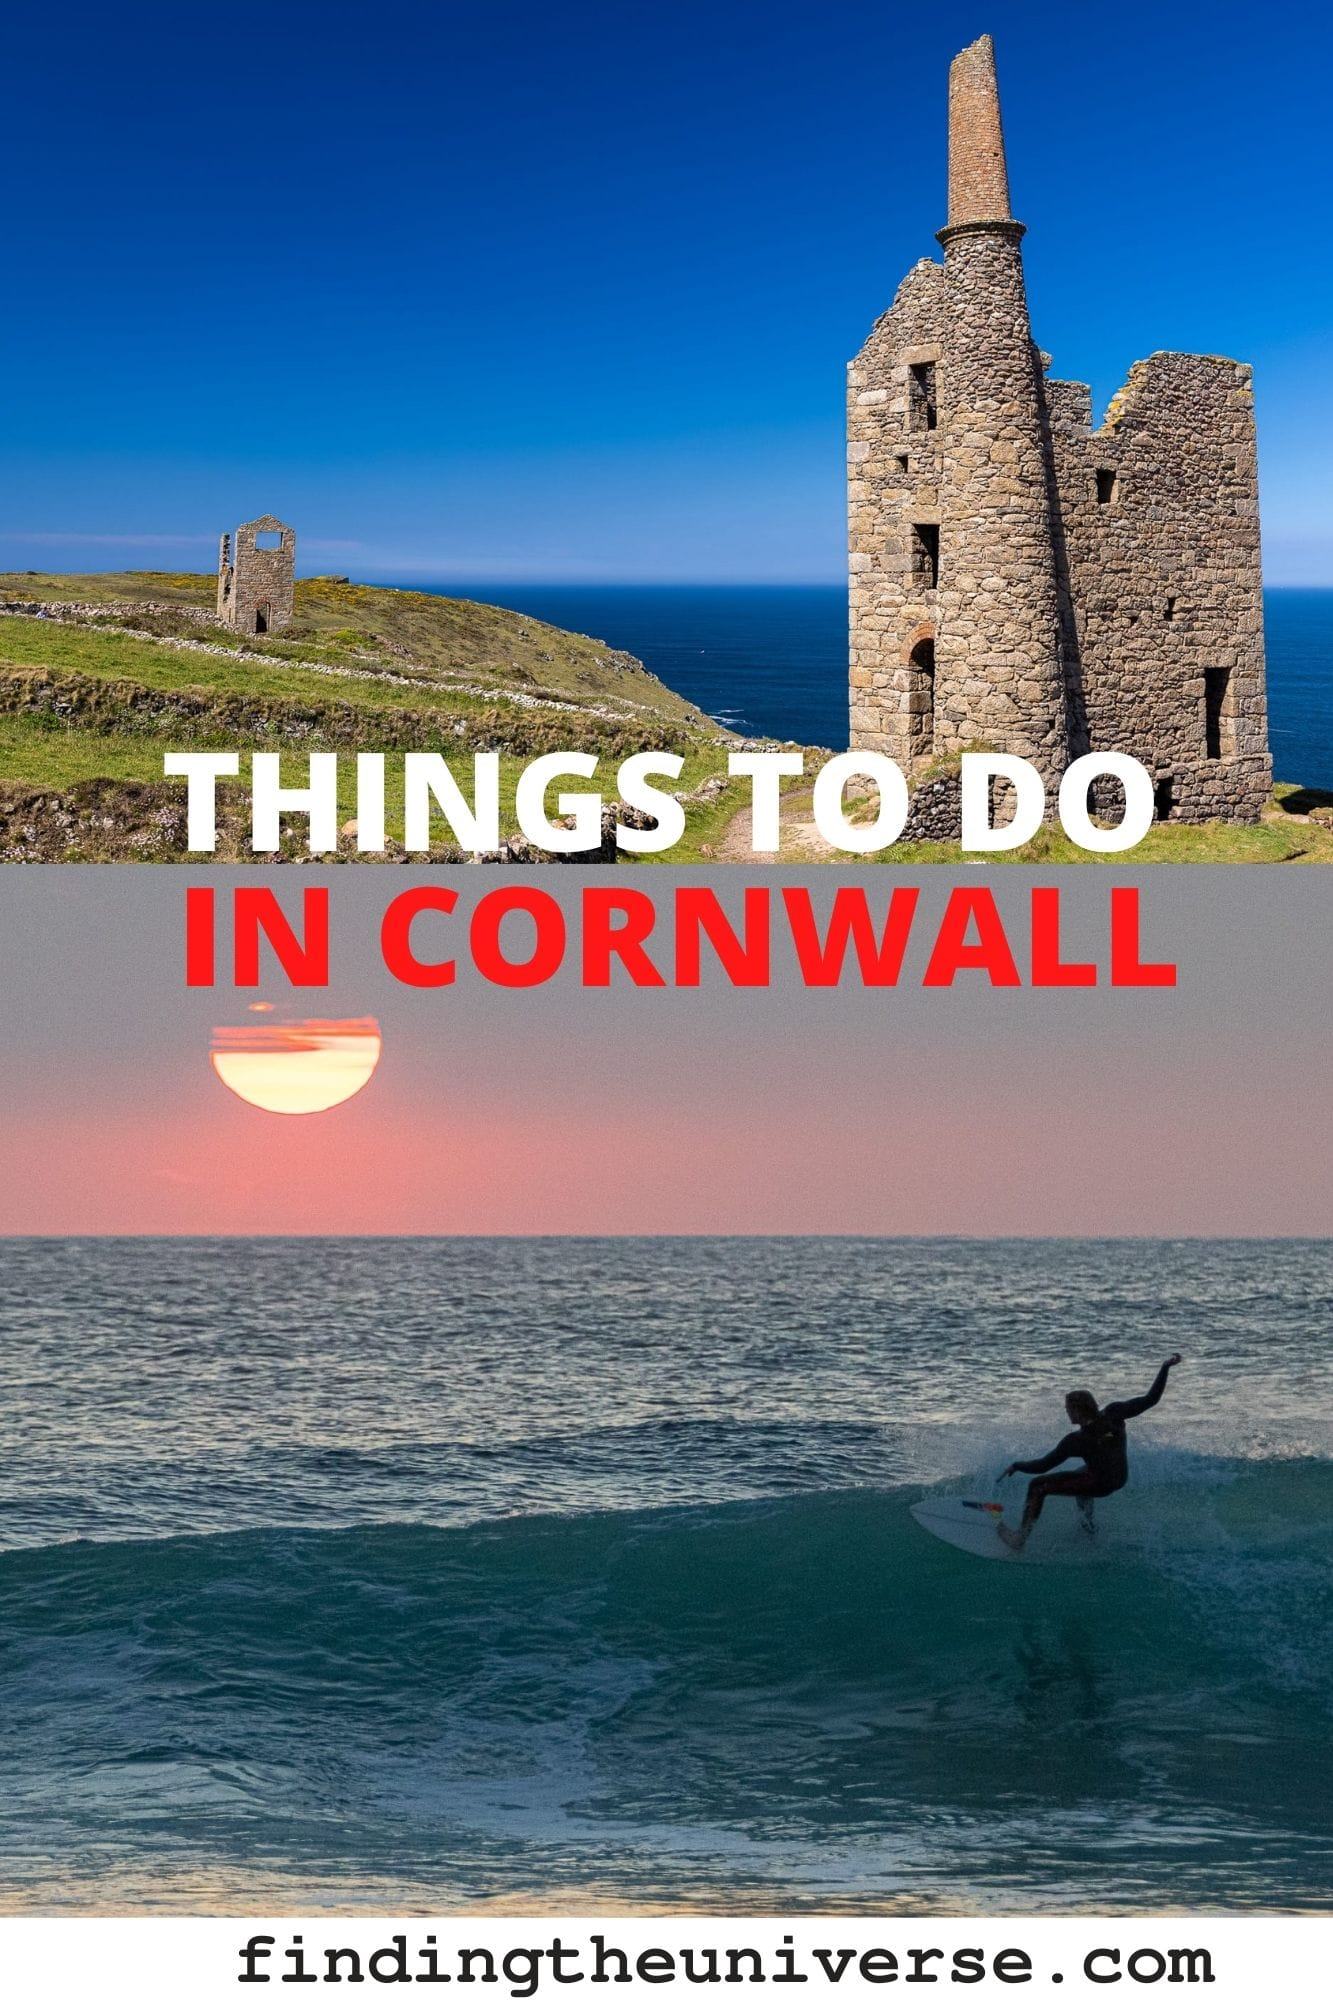 A detailed guide to things to do in Cornwall. From coastal walks to beaches, museums, family friendly attractions and lots more!